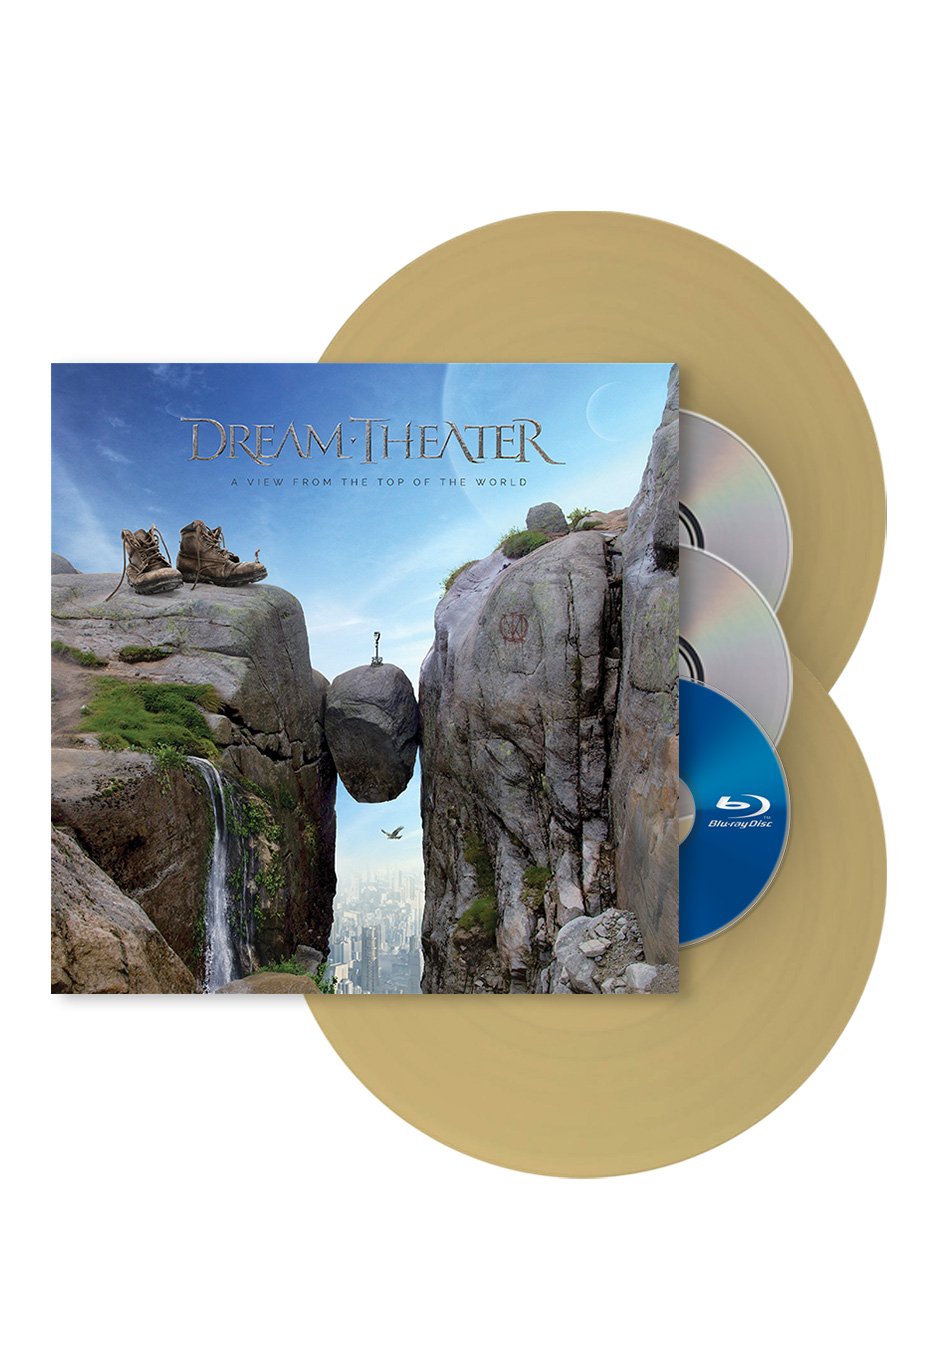 Dream Theater - A View From The Top Of The World Ltd. Deluxe - Box Set